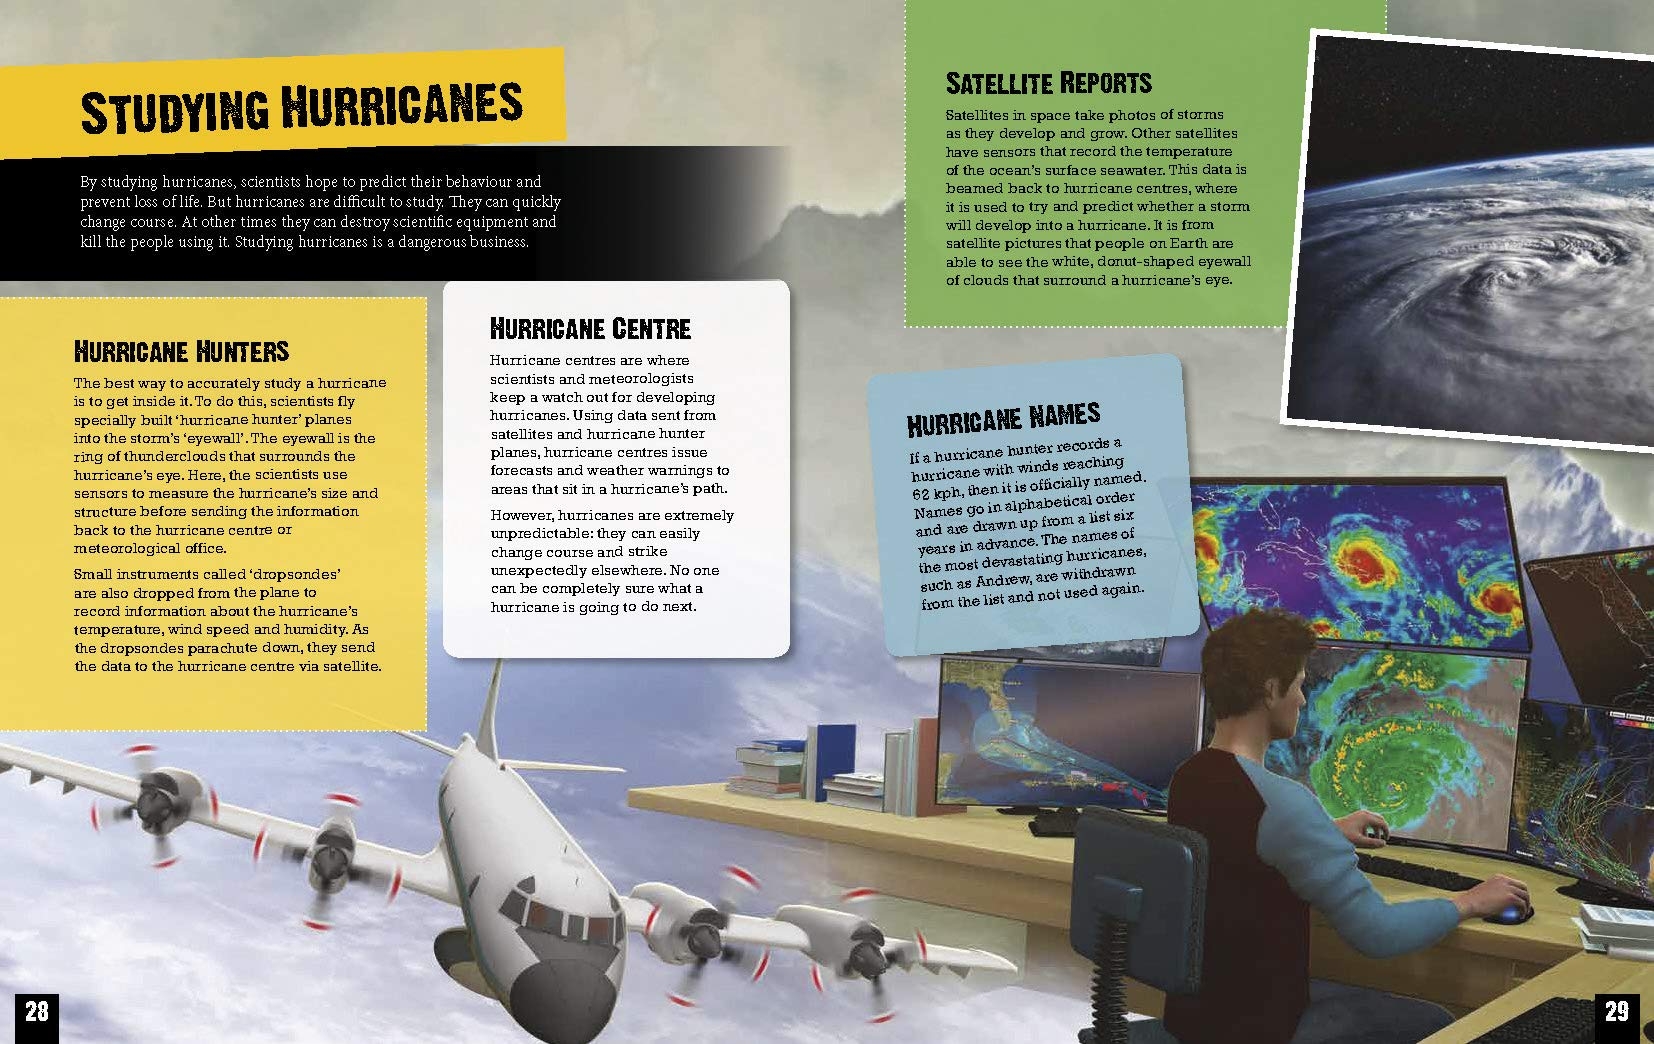 Hurricanes and Tornadoes (Natural Disaster Zone)